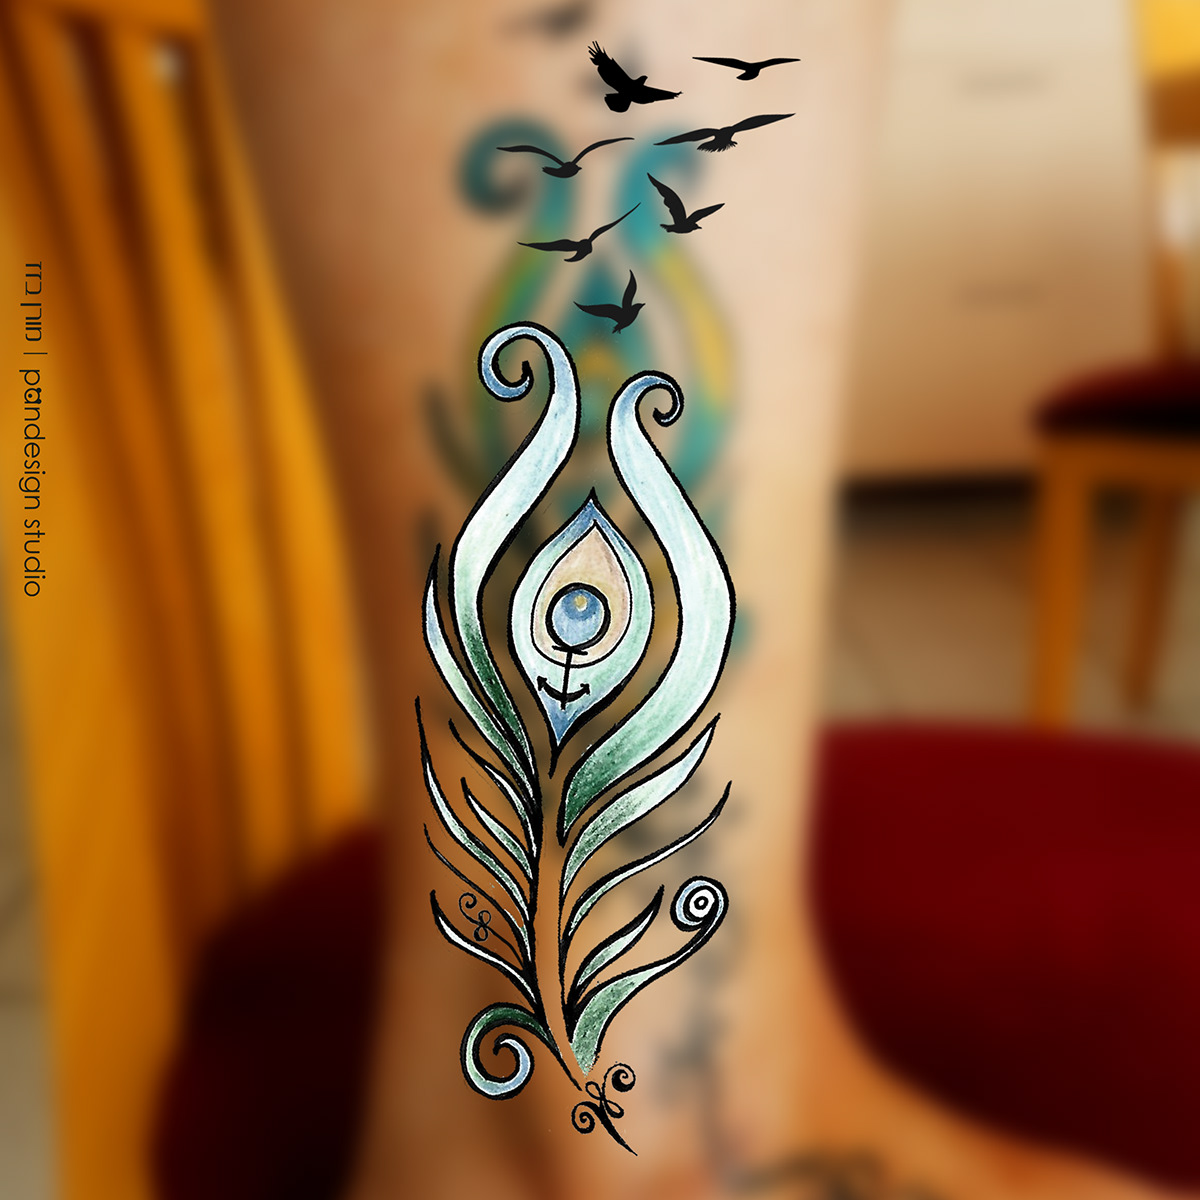 Crazy ink tattoo  Body piercing on X FLUTE WITH PEACOCK FEATHER TATTOO  DESIGN By tattoo artist For more info visithttpstcoVM8M7cYhda  httpstco9VpLRrKq29  X